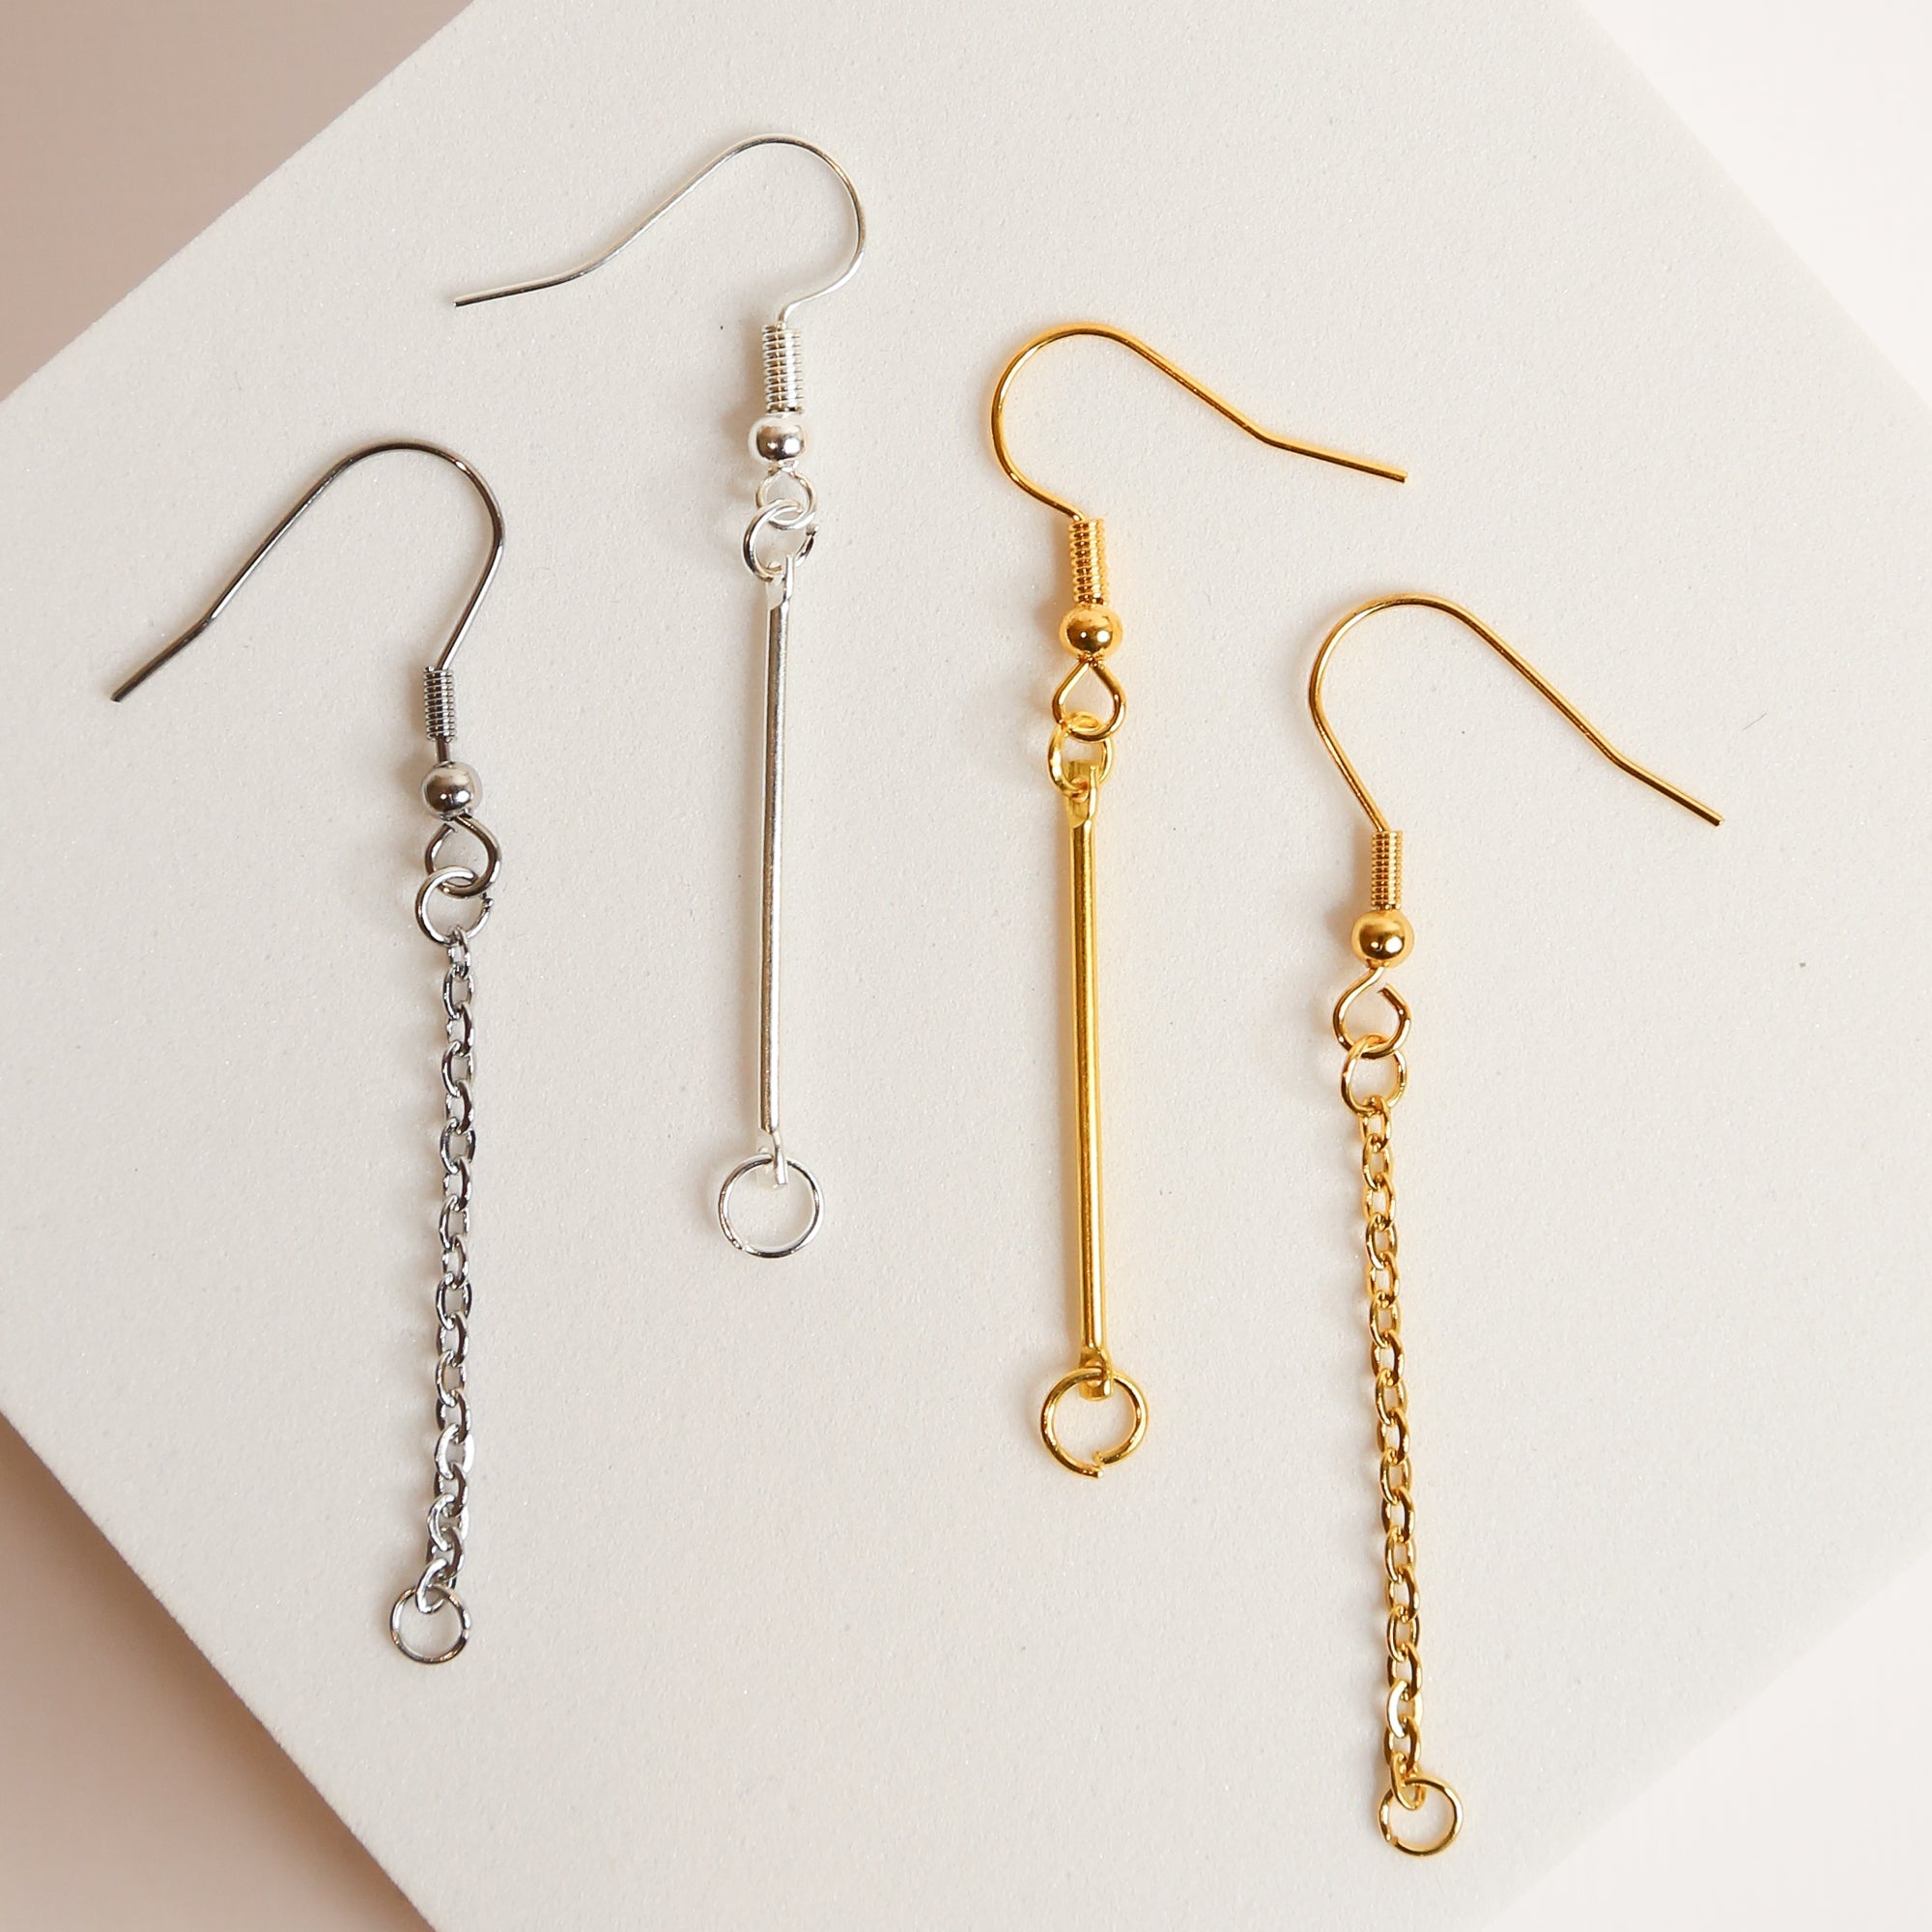 Earring Stick Drop with Hooks - 10 pieces